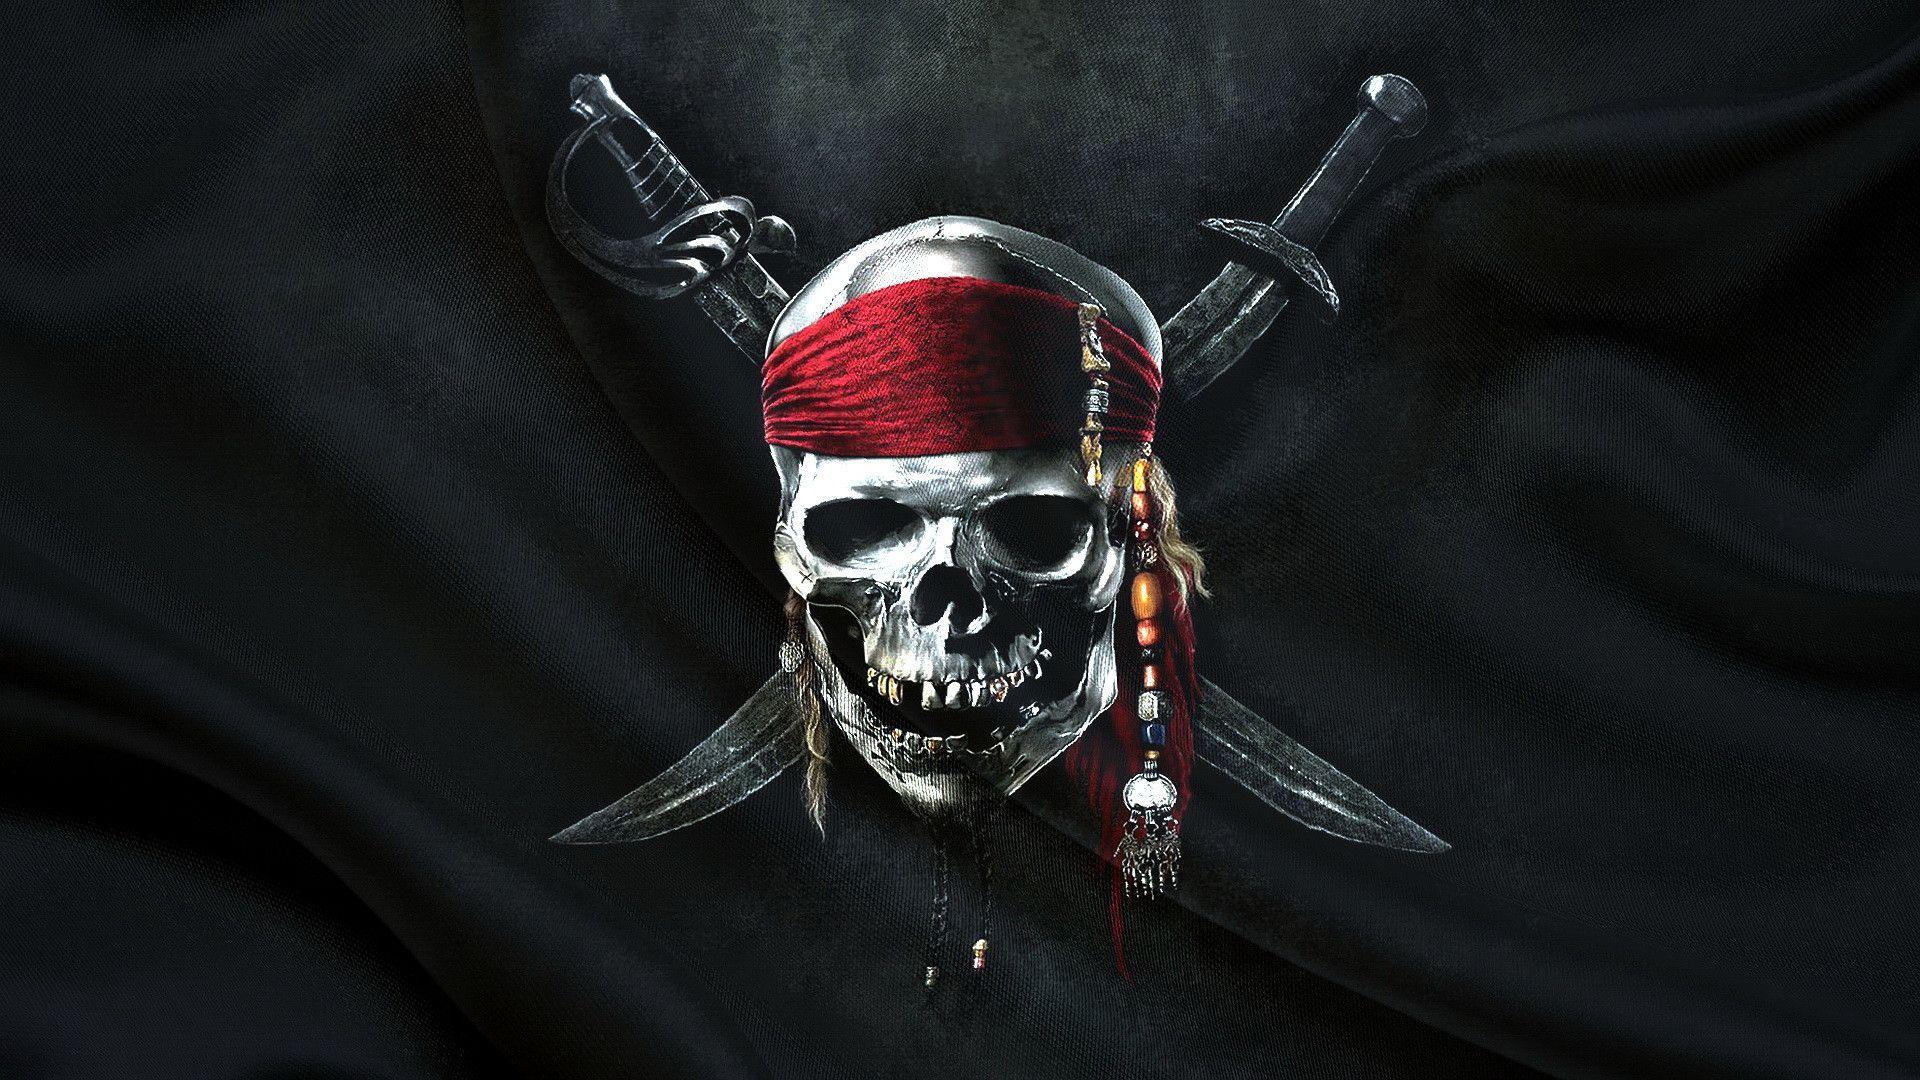 Jolly Roger Pirates Flag. Background and Texture